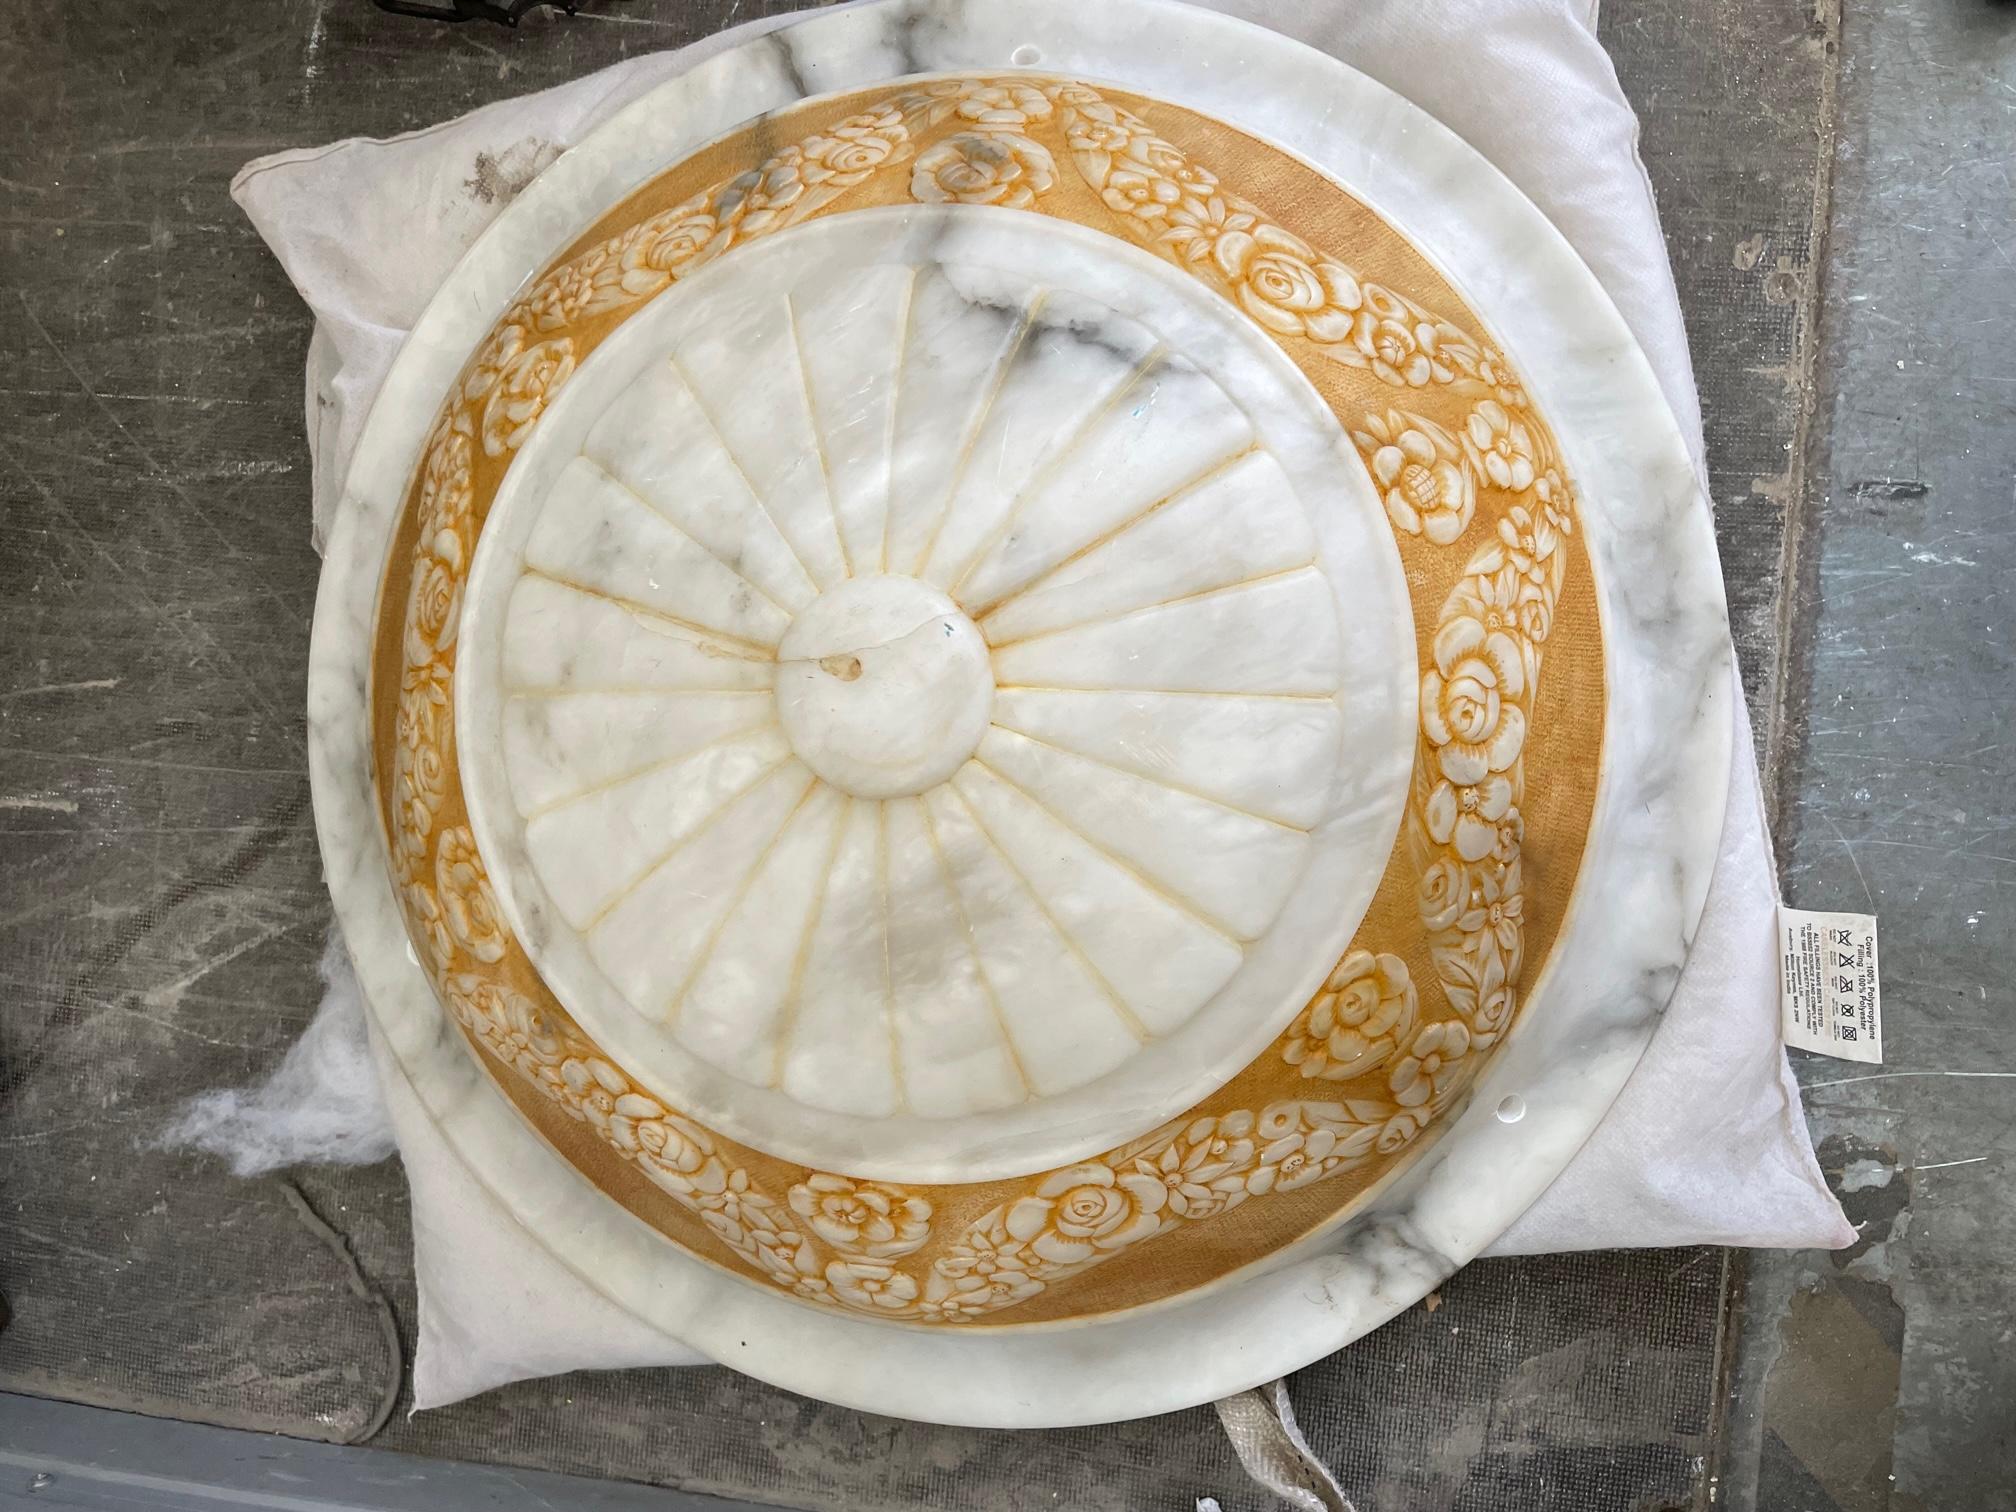 Early 20th century Italian turned and carved alabaster plaffonier of shallow dished form in the Pompeian style, the lobed button centre set within an ochre stained and floral garlanded border, the matching bronzed mental and alabaster ceiling rose